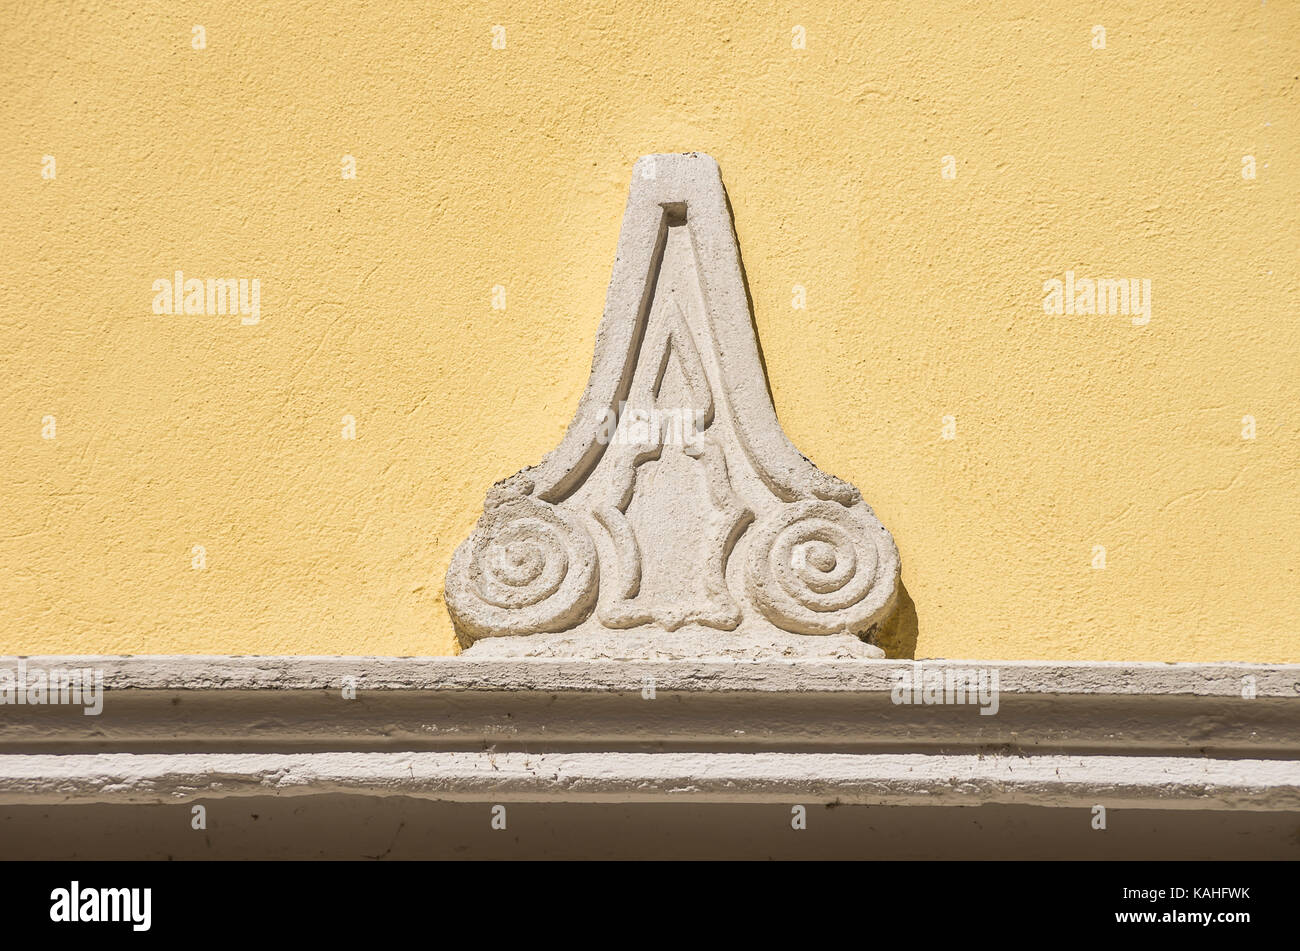 Historic facade ornament in the form of a candle, Pirna, Saxony, Germany. Stock Photo